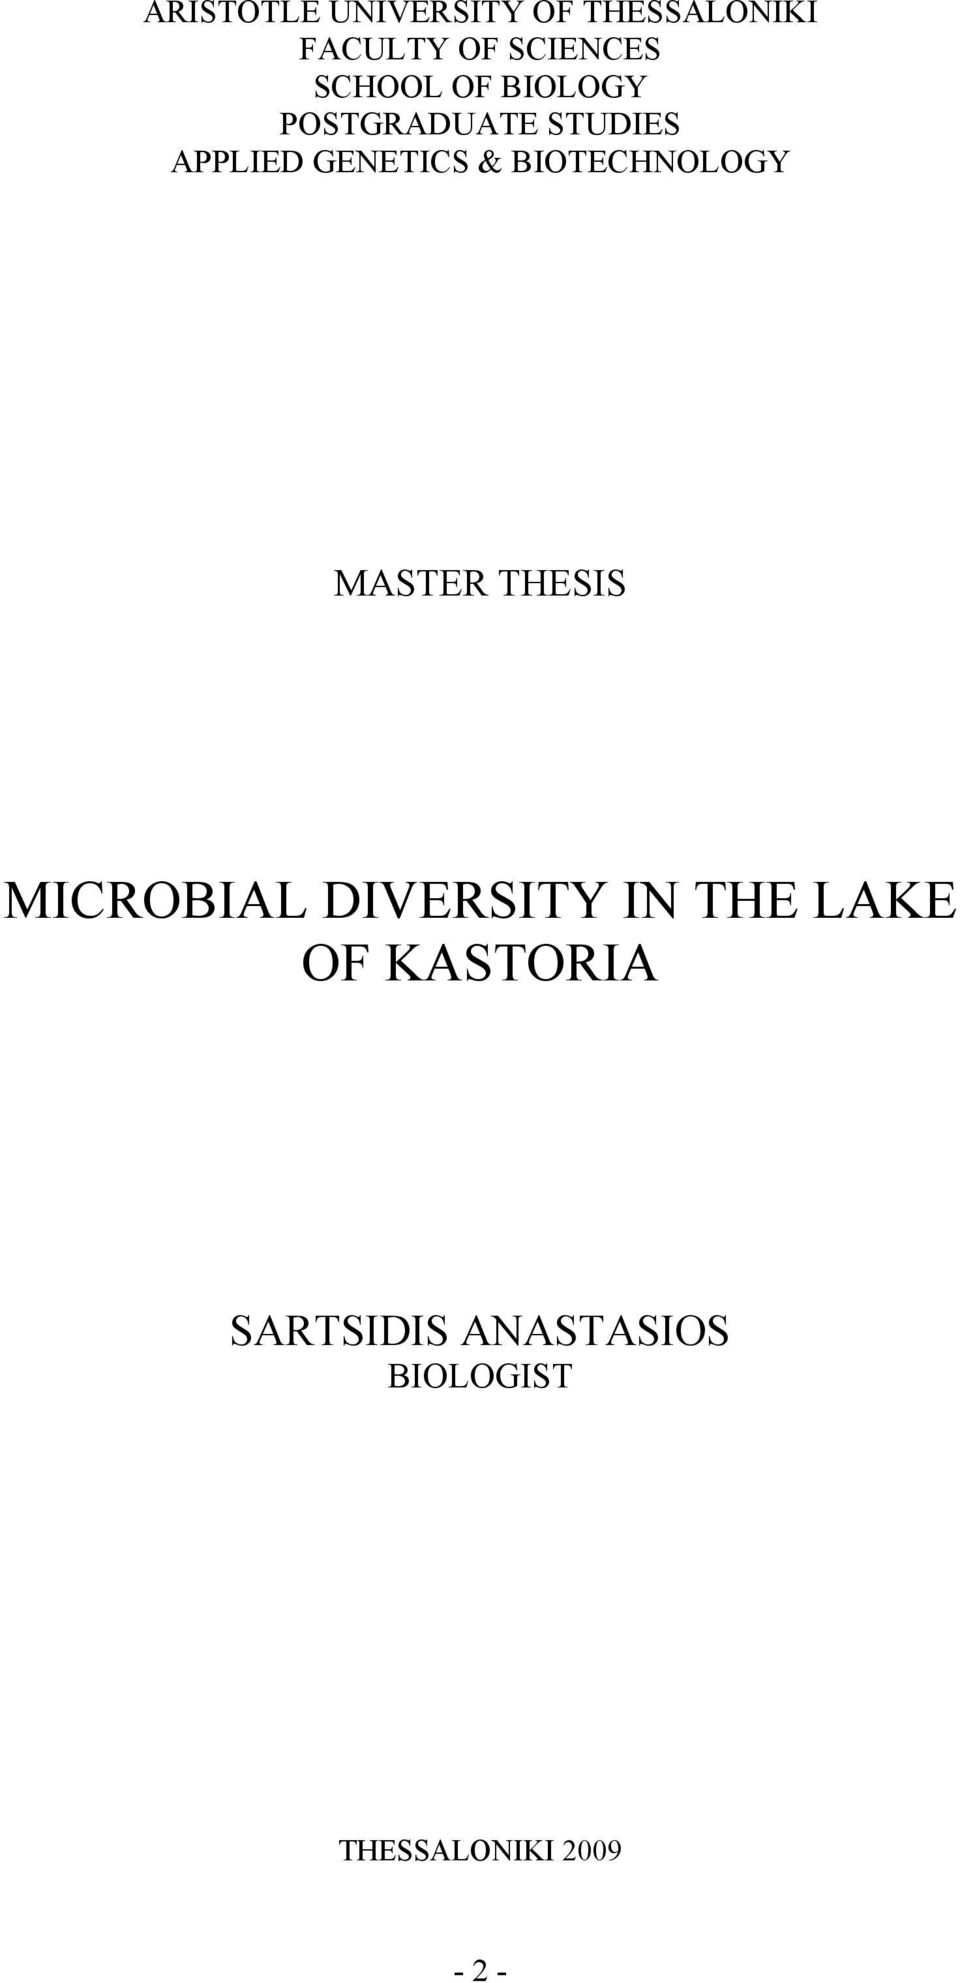 BIOTECHNOLOGY MASTER THESIS MICROBIAL DIVERSITY IN THE LAKE